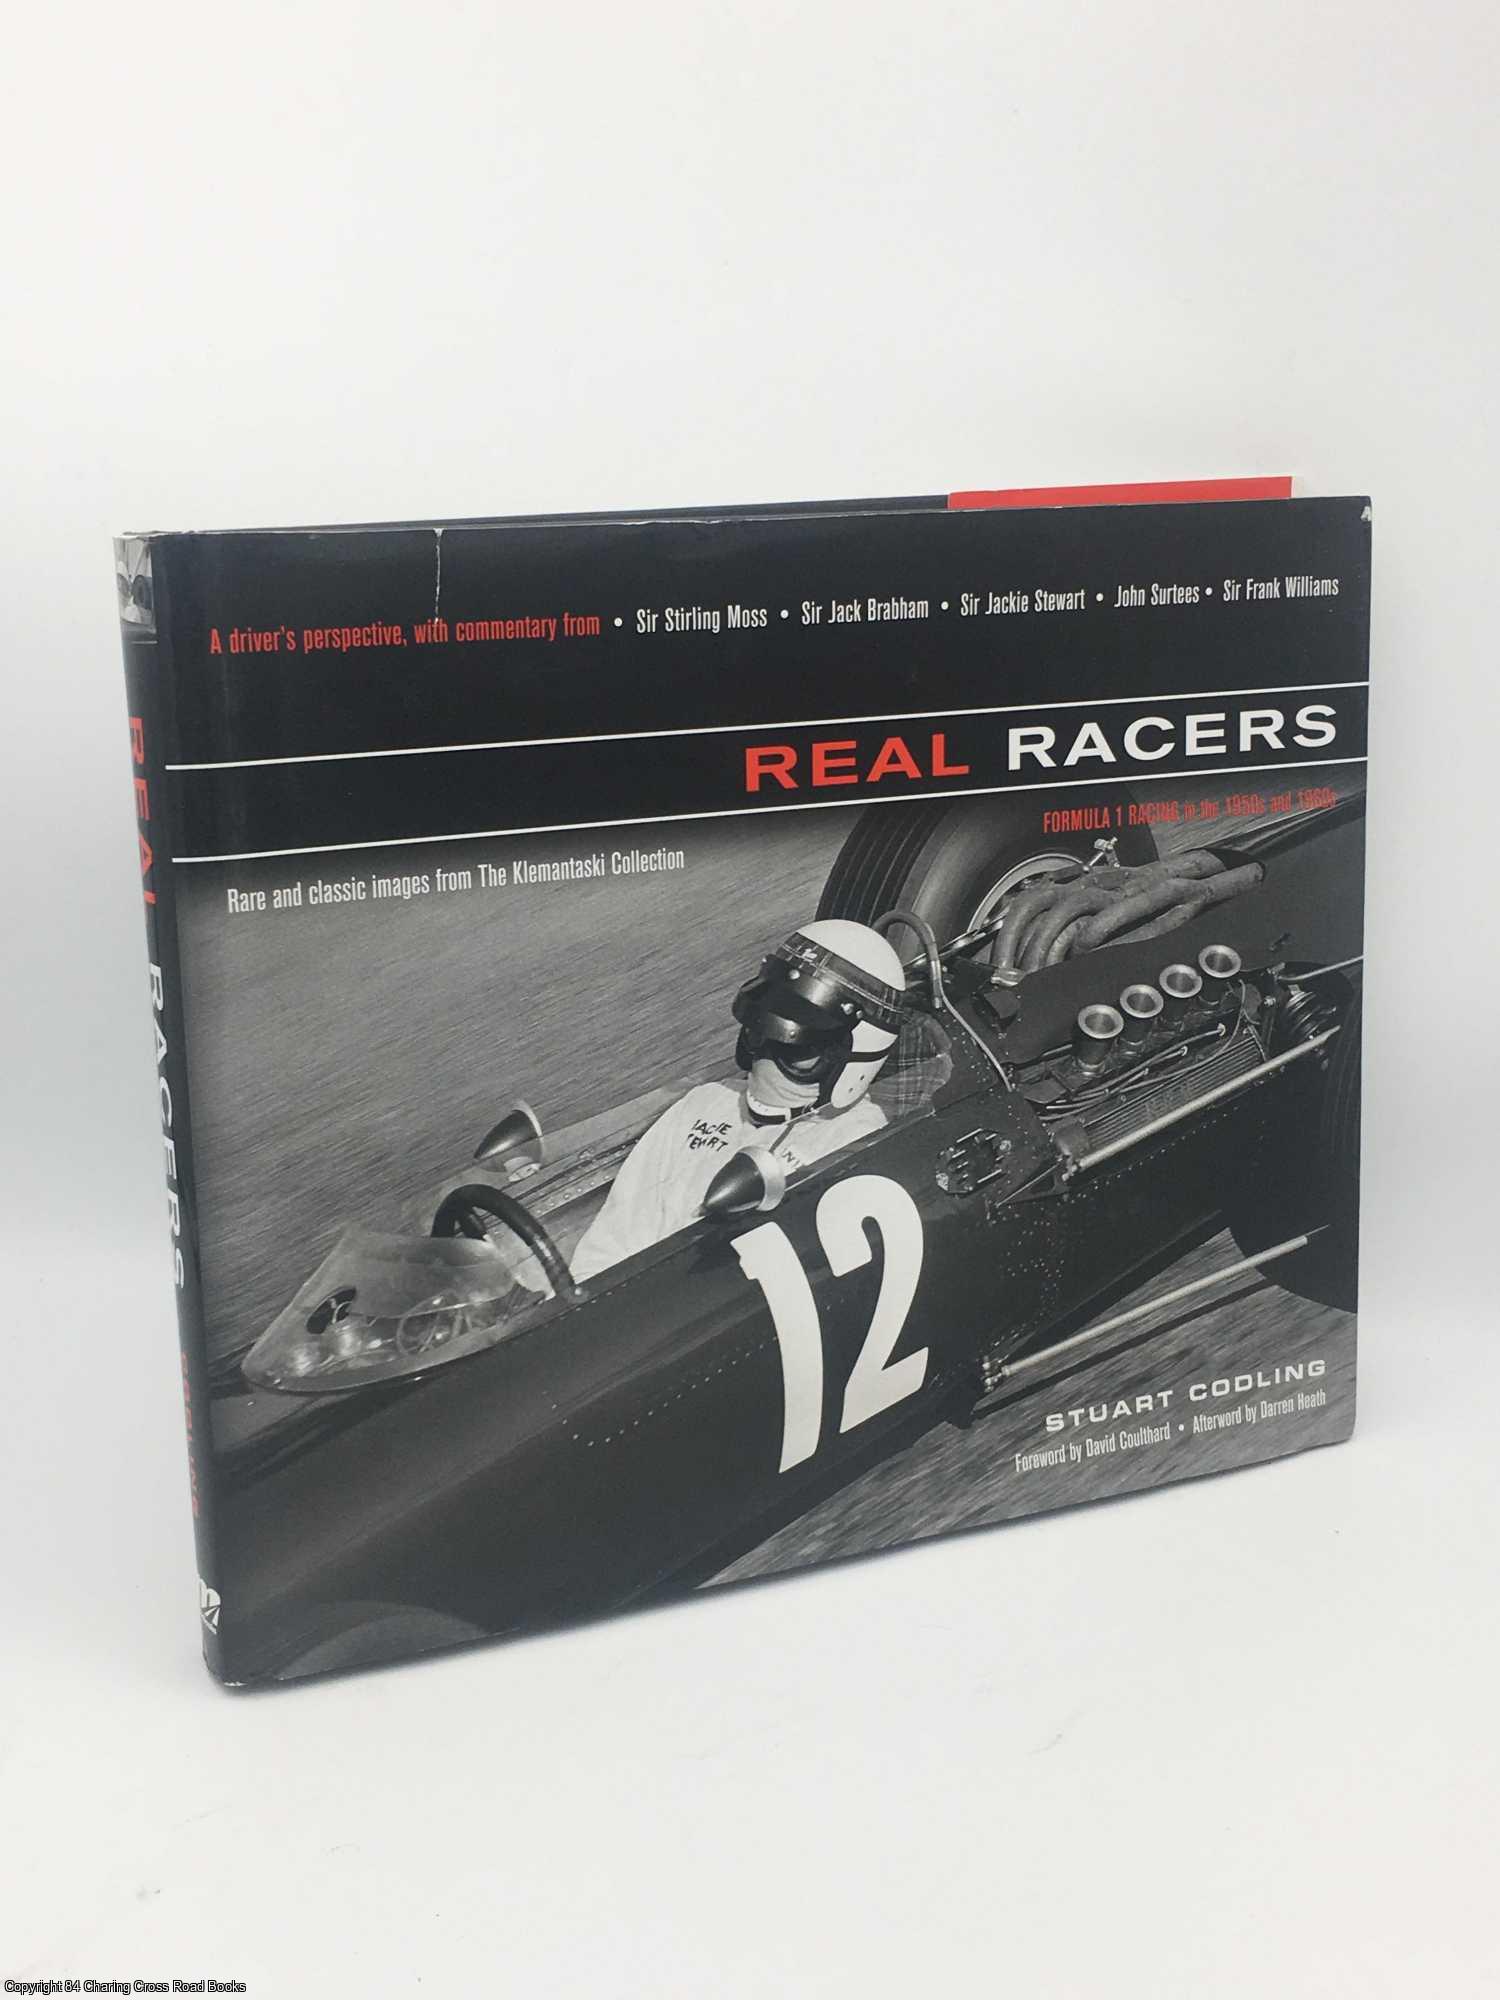 Codling, Stuart - Real Racers: Formula 1 in the 1950s and 1960s: a Driver's Perspective. Rare and Classic Images from the Klemantaski Collection